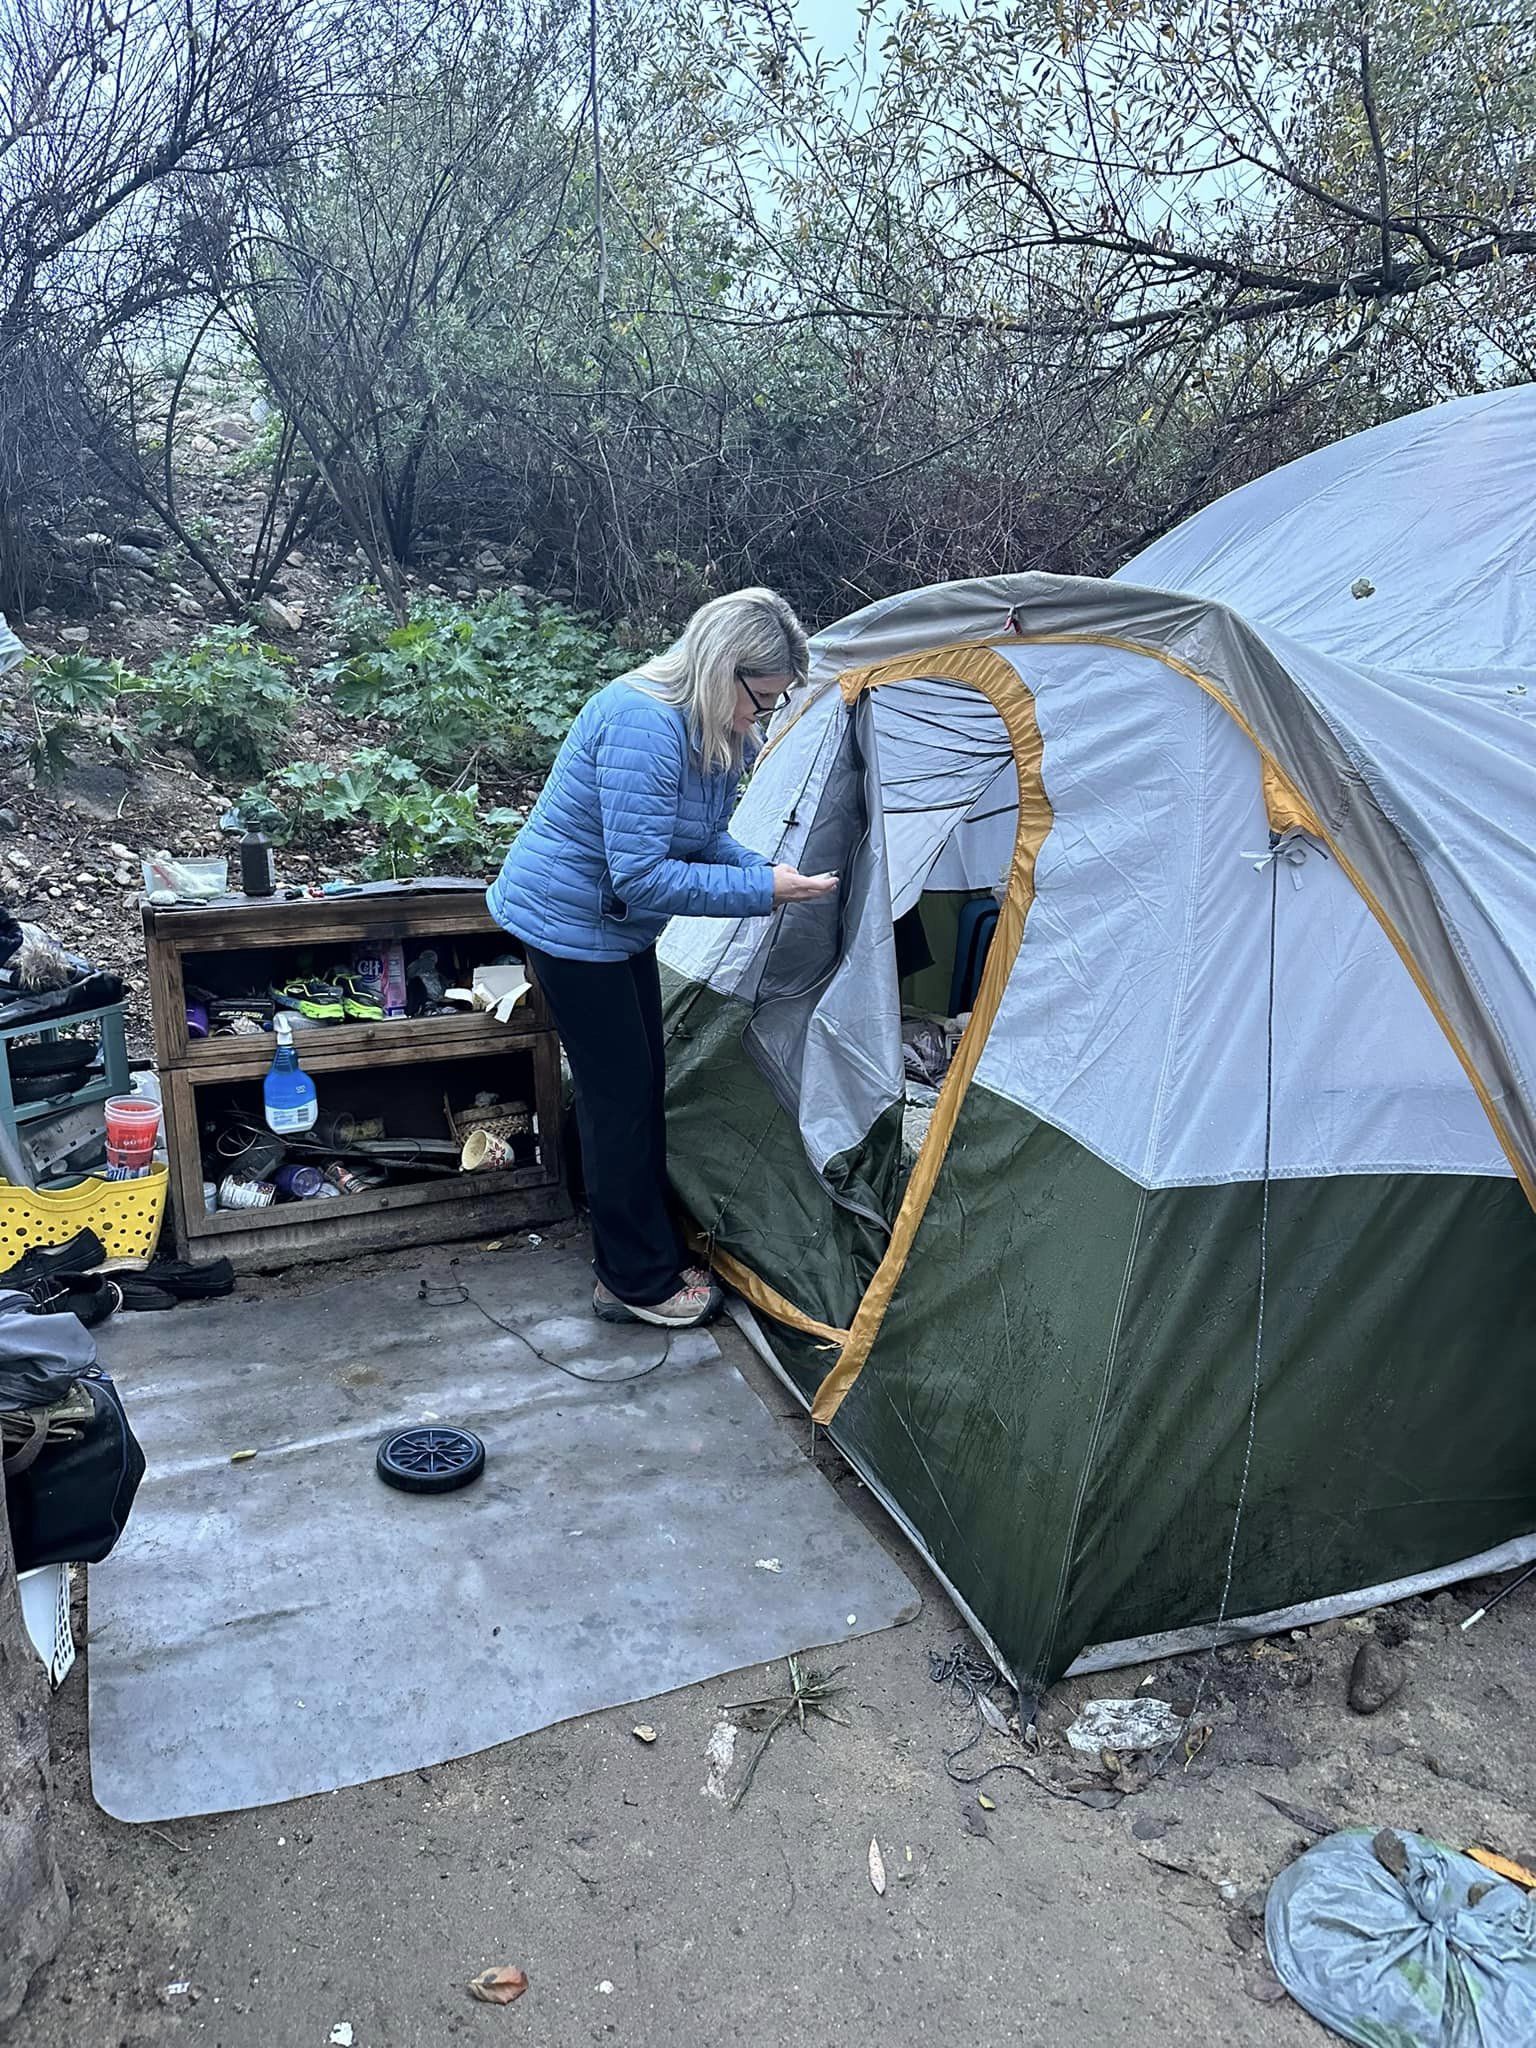 Supervisor Dawn Rowe looks into the tent of a homeless individual.